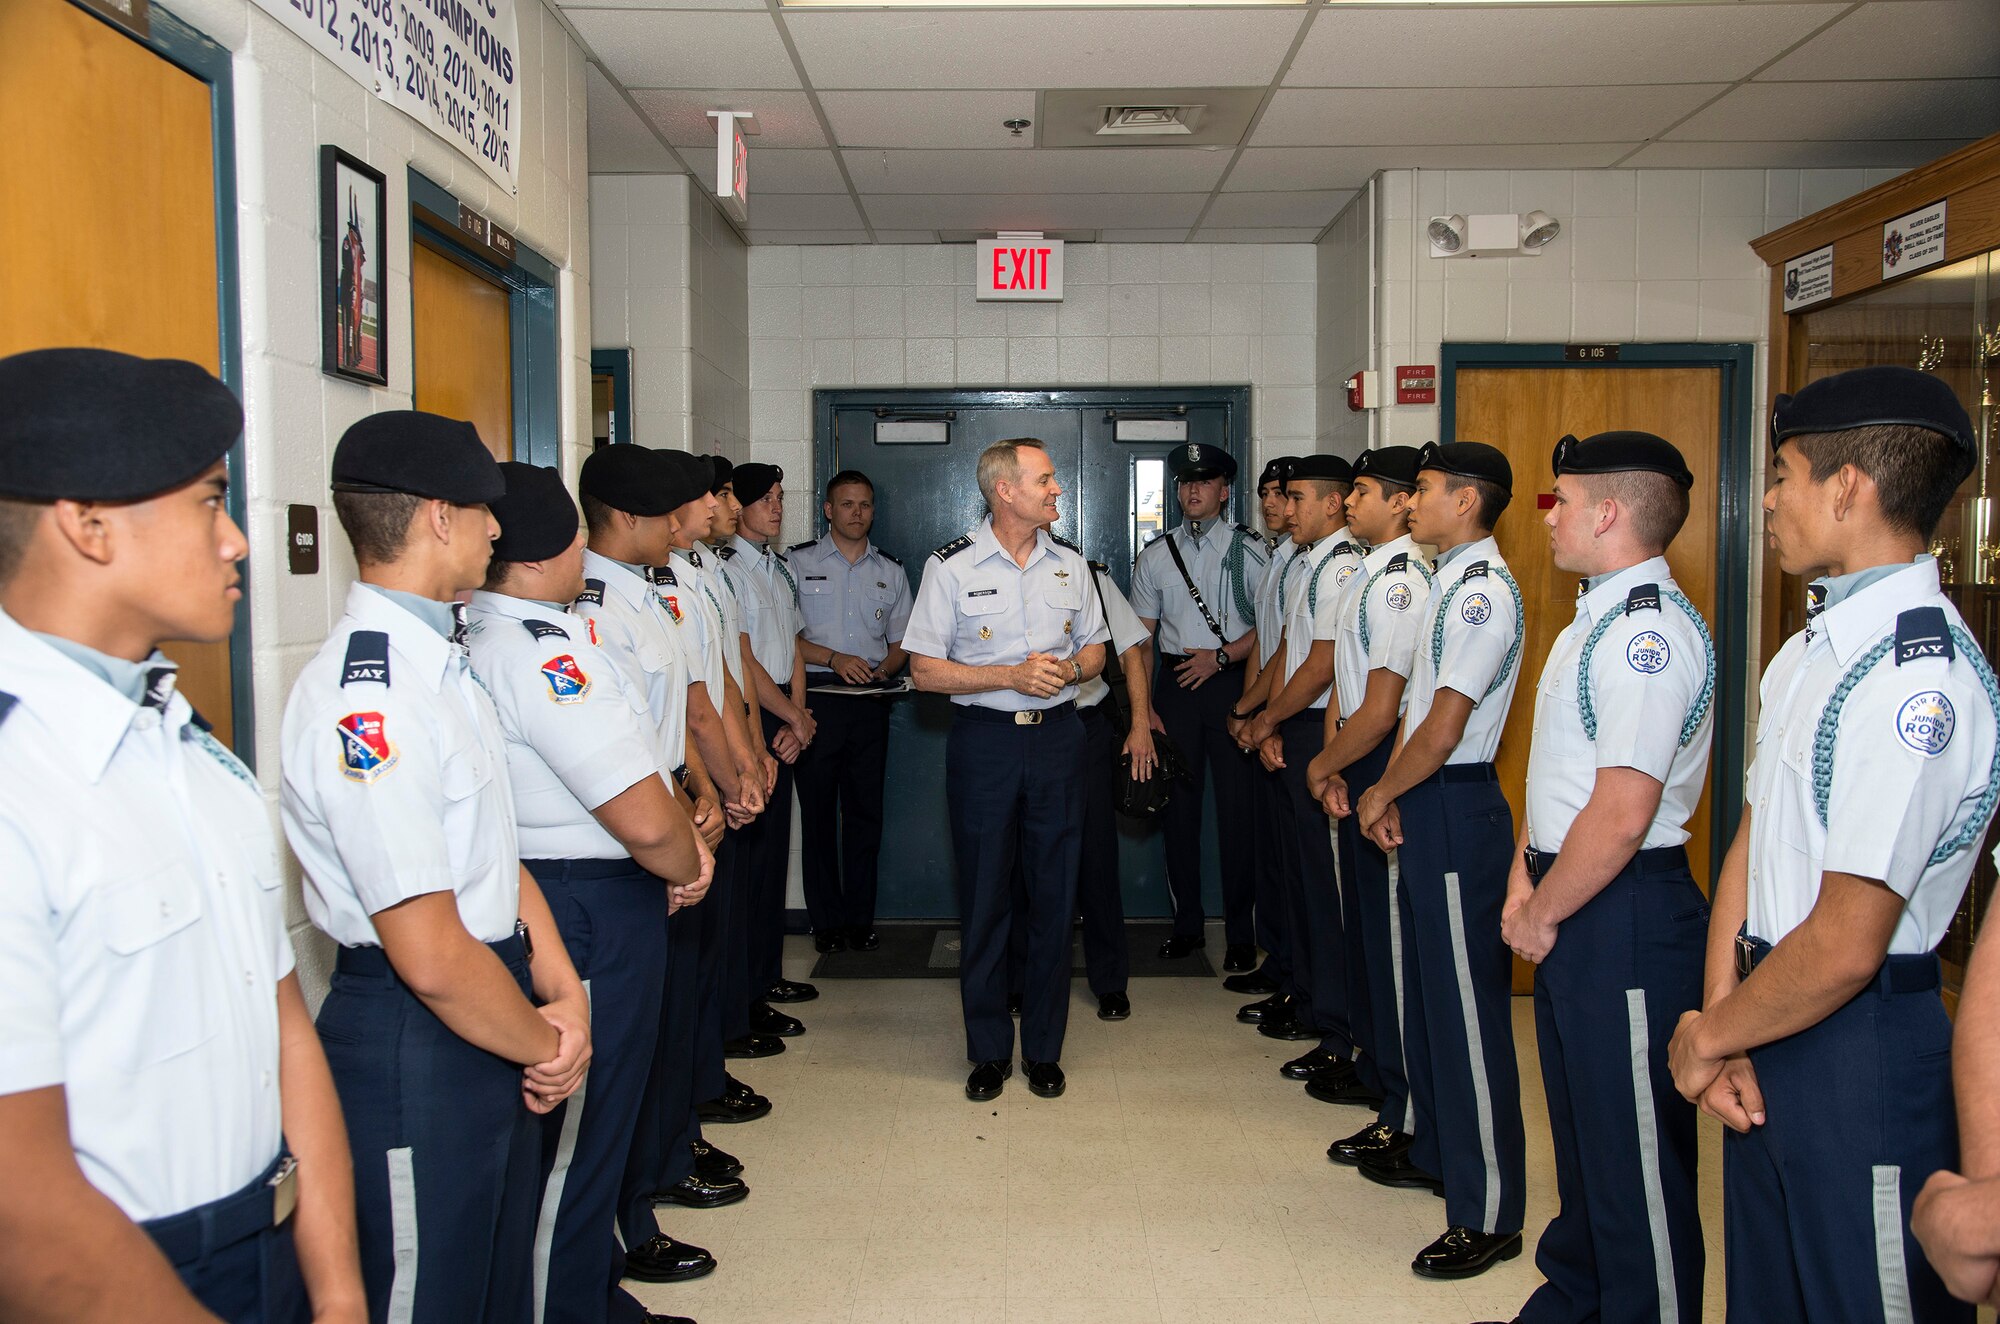 U.S. Air Force Lt. Gen. Darryl Roberson, commander Air Education and Training Command meets Junior Reserve Officer Training Corps cadets April 19 at John Jay High School in San Antonio, Texas. Roberson was inducted as an honorary Silver Eagle, making him the fourth person to receive the honorary title. (U.S. Air Force photo by Johnny Saldivar)